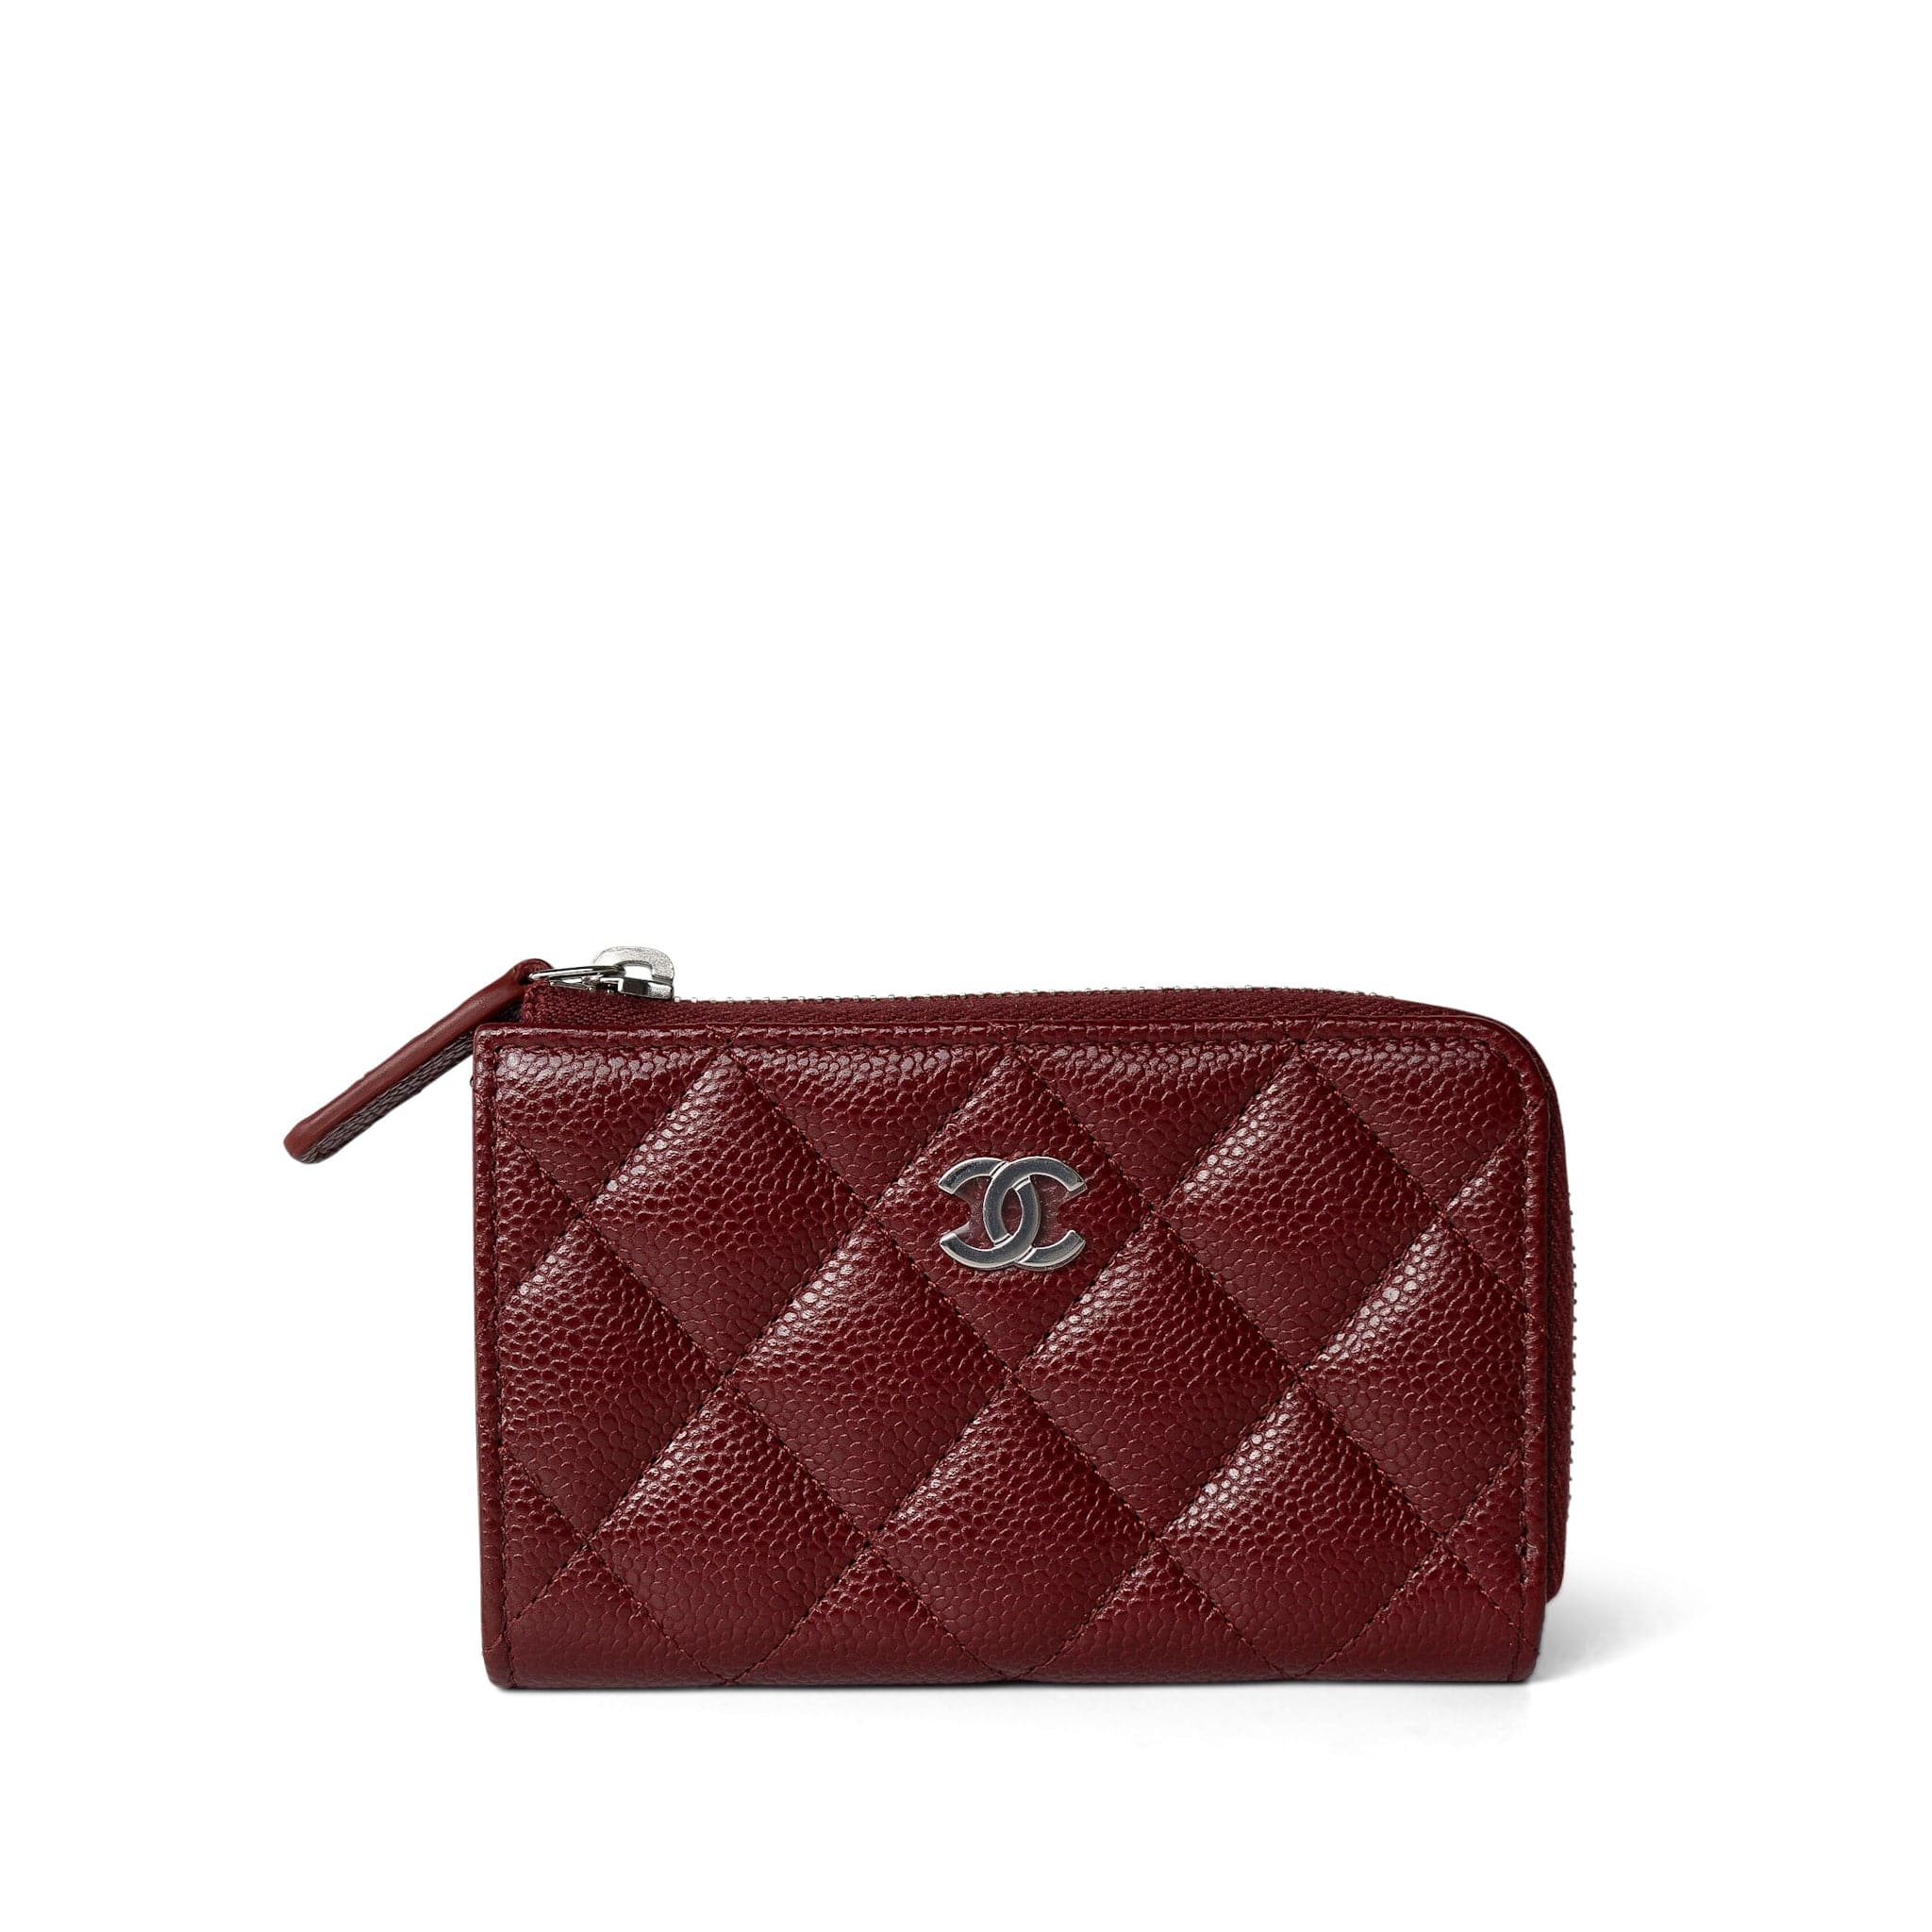 CHANEL Handbag Burgundy Burgundy Caviar Quilted Zipped Coin Purse Key Holder - Redeluxe